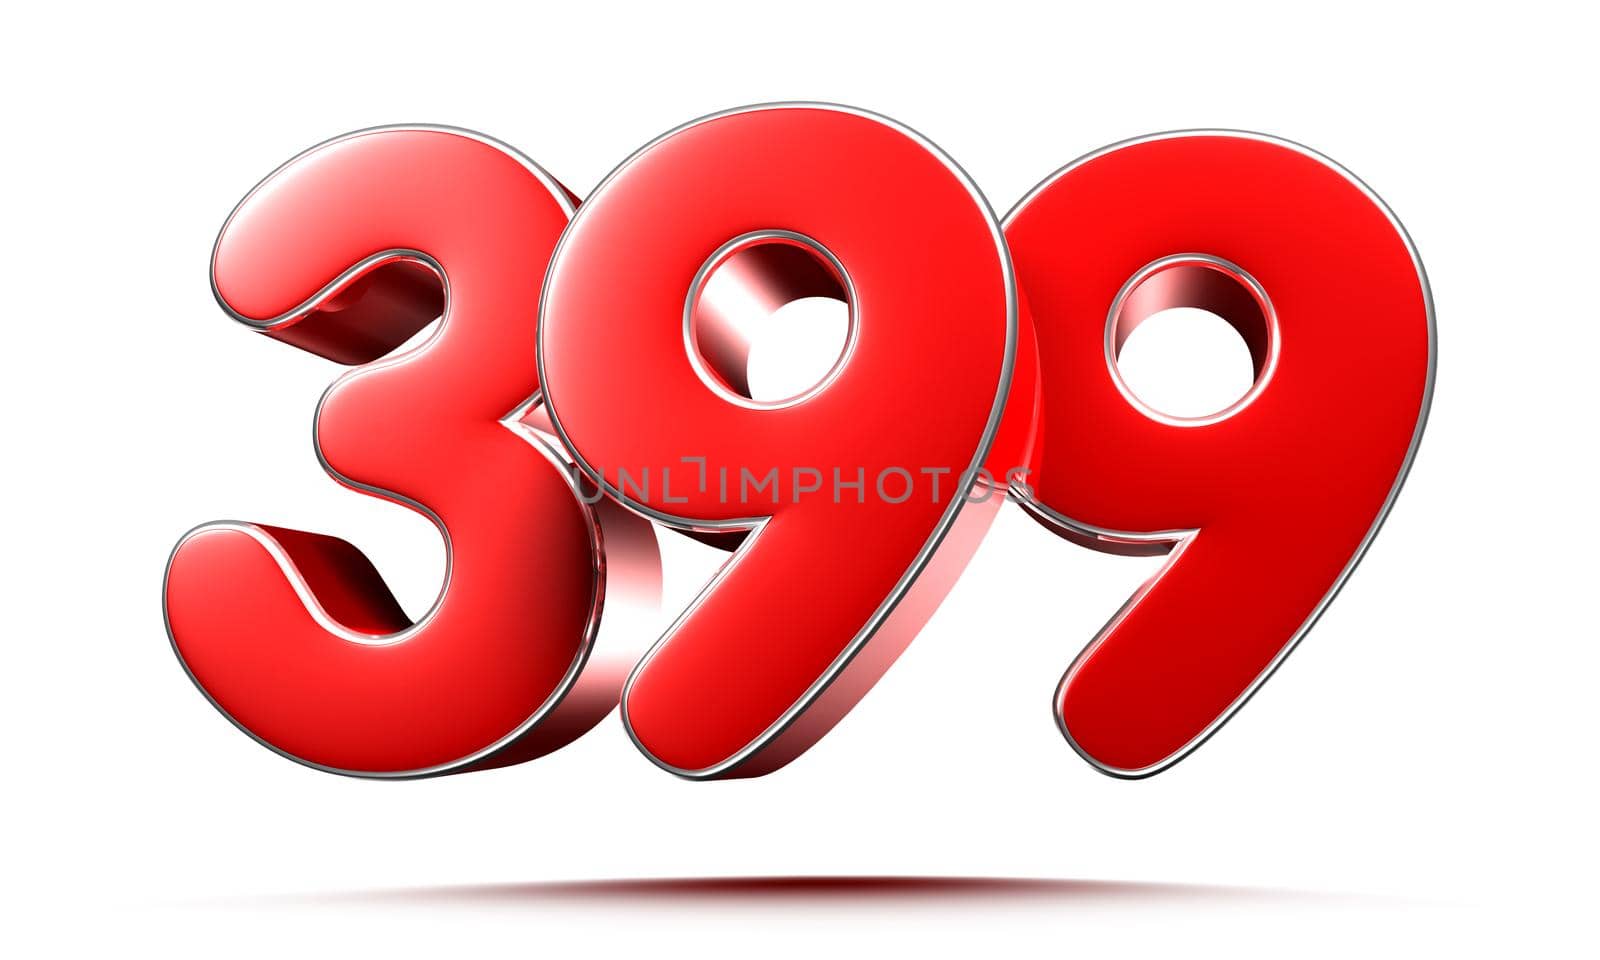 Rounded red numbers 399 on white background 3D illustration with clipping path by thitimontoyai